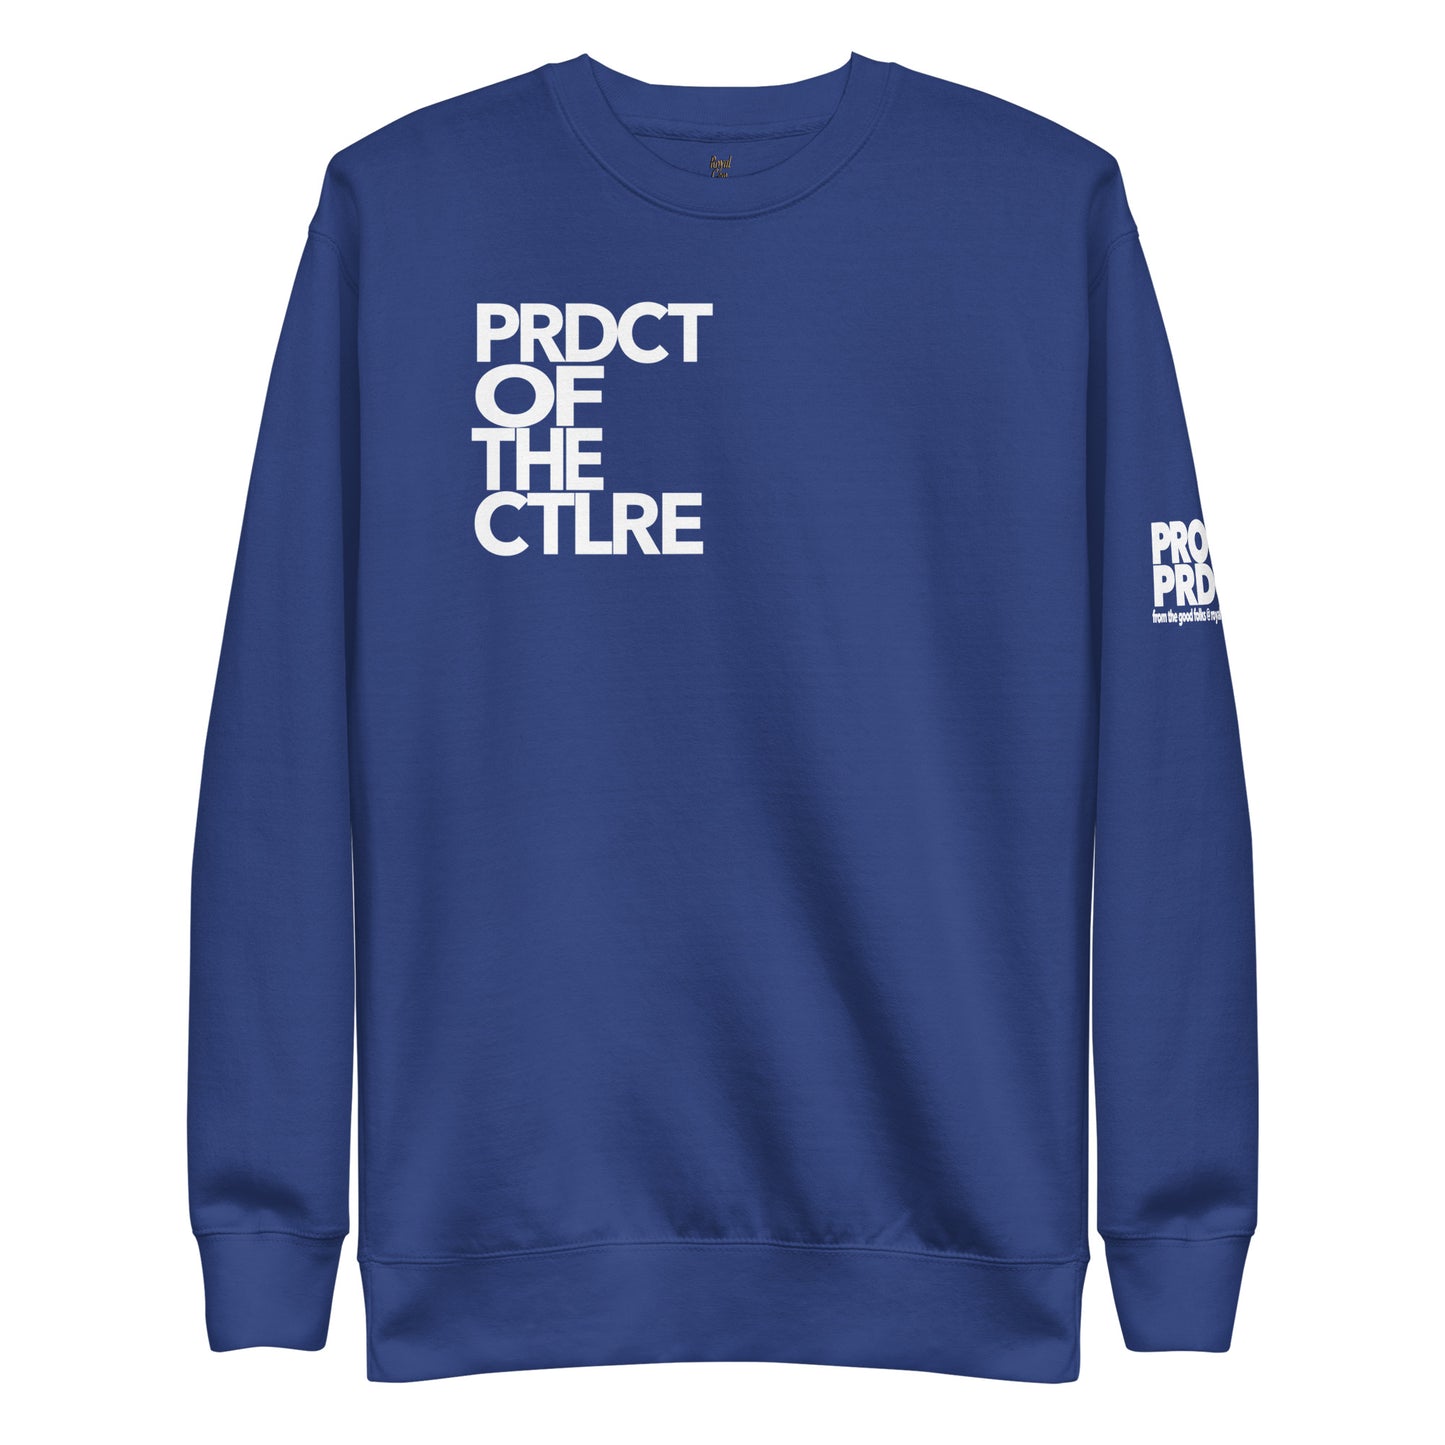 "Product of the Culture" Sweatshirt